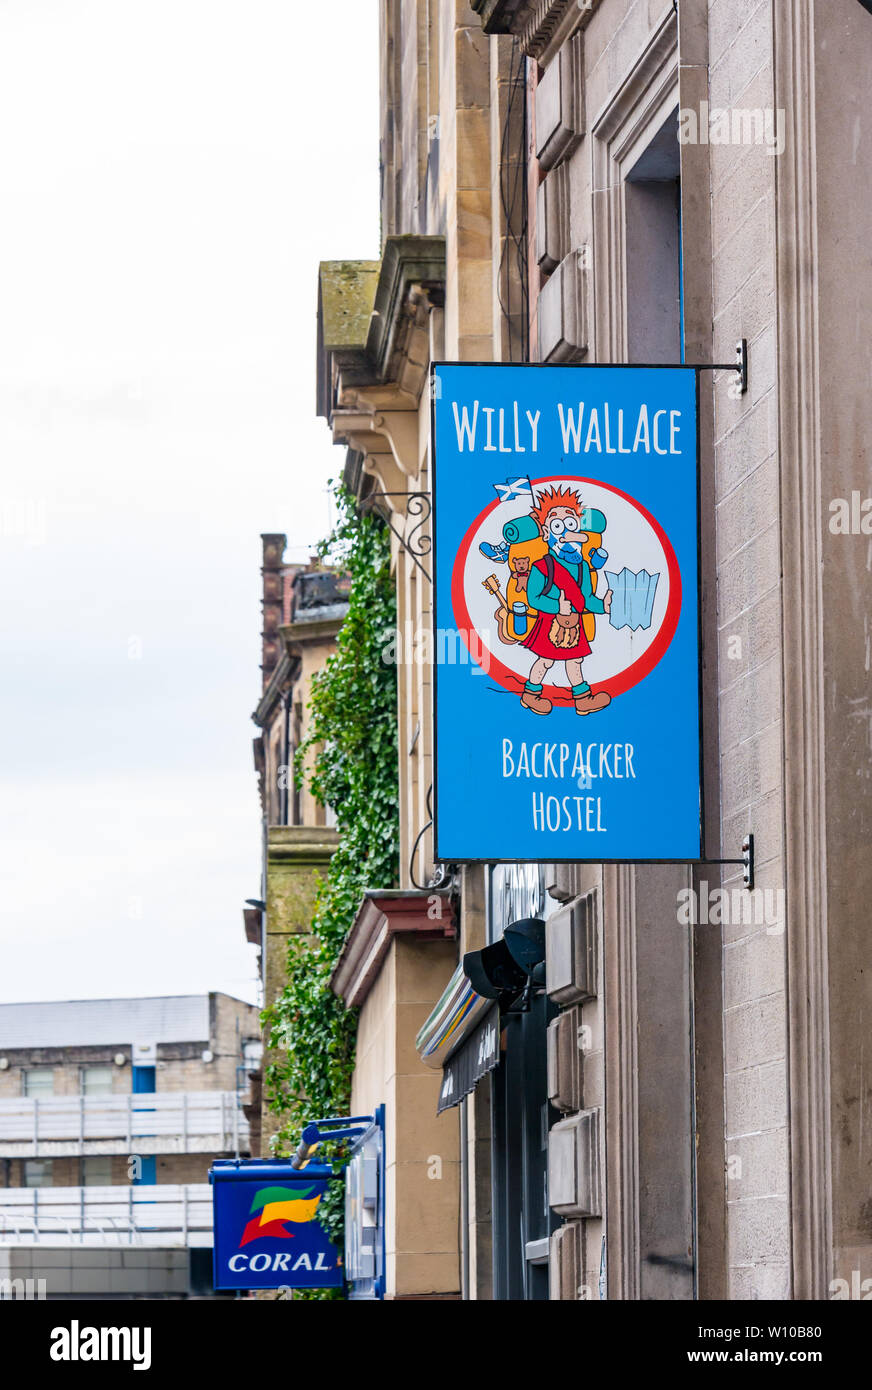 Willy Wallace Backpacker Hostel sign, Murray Place, Stirling, Scotland, UK Stock Photo